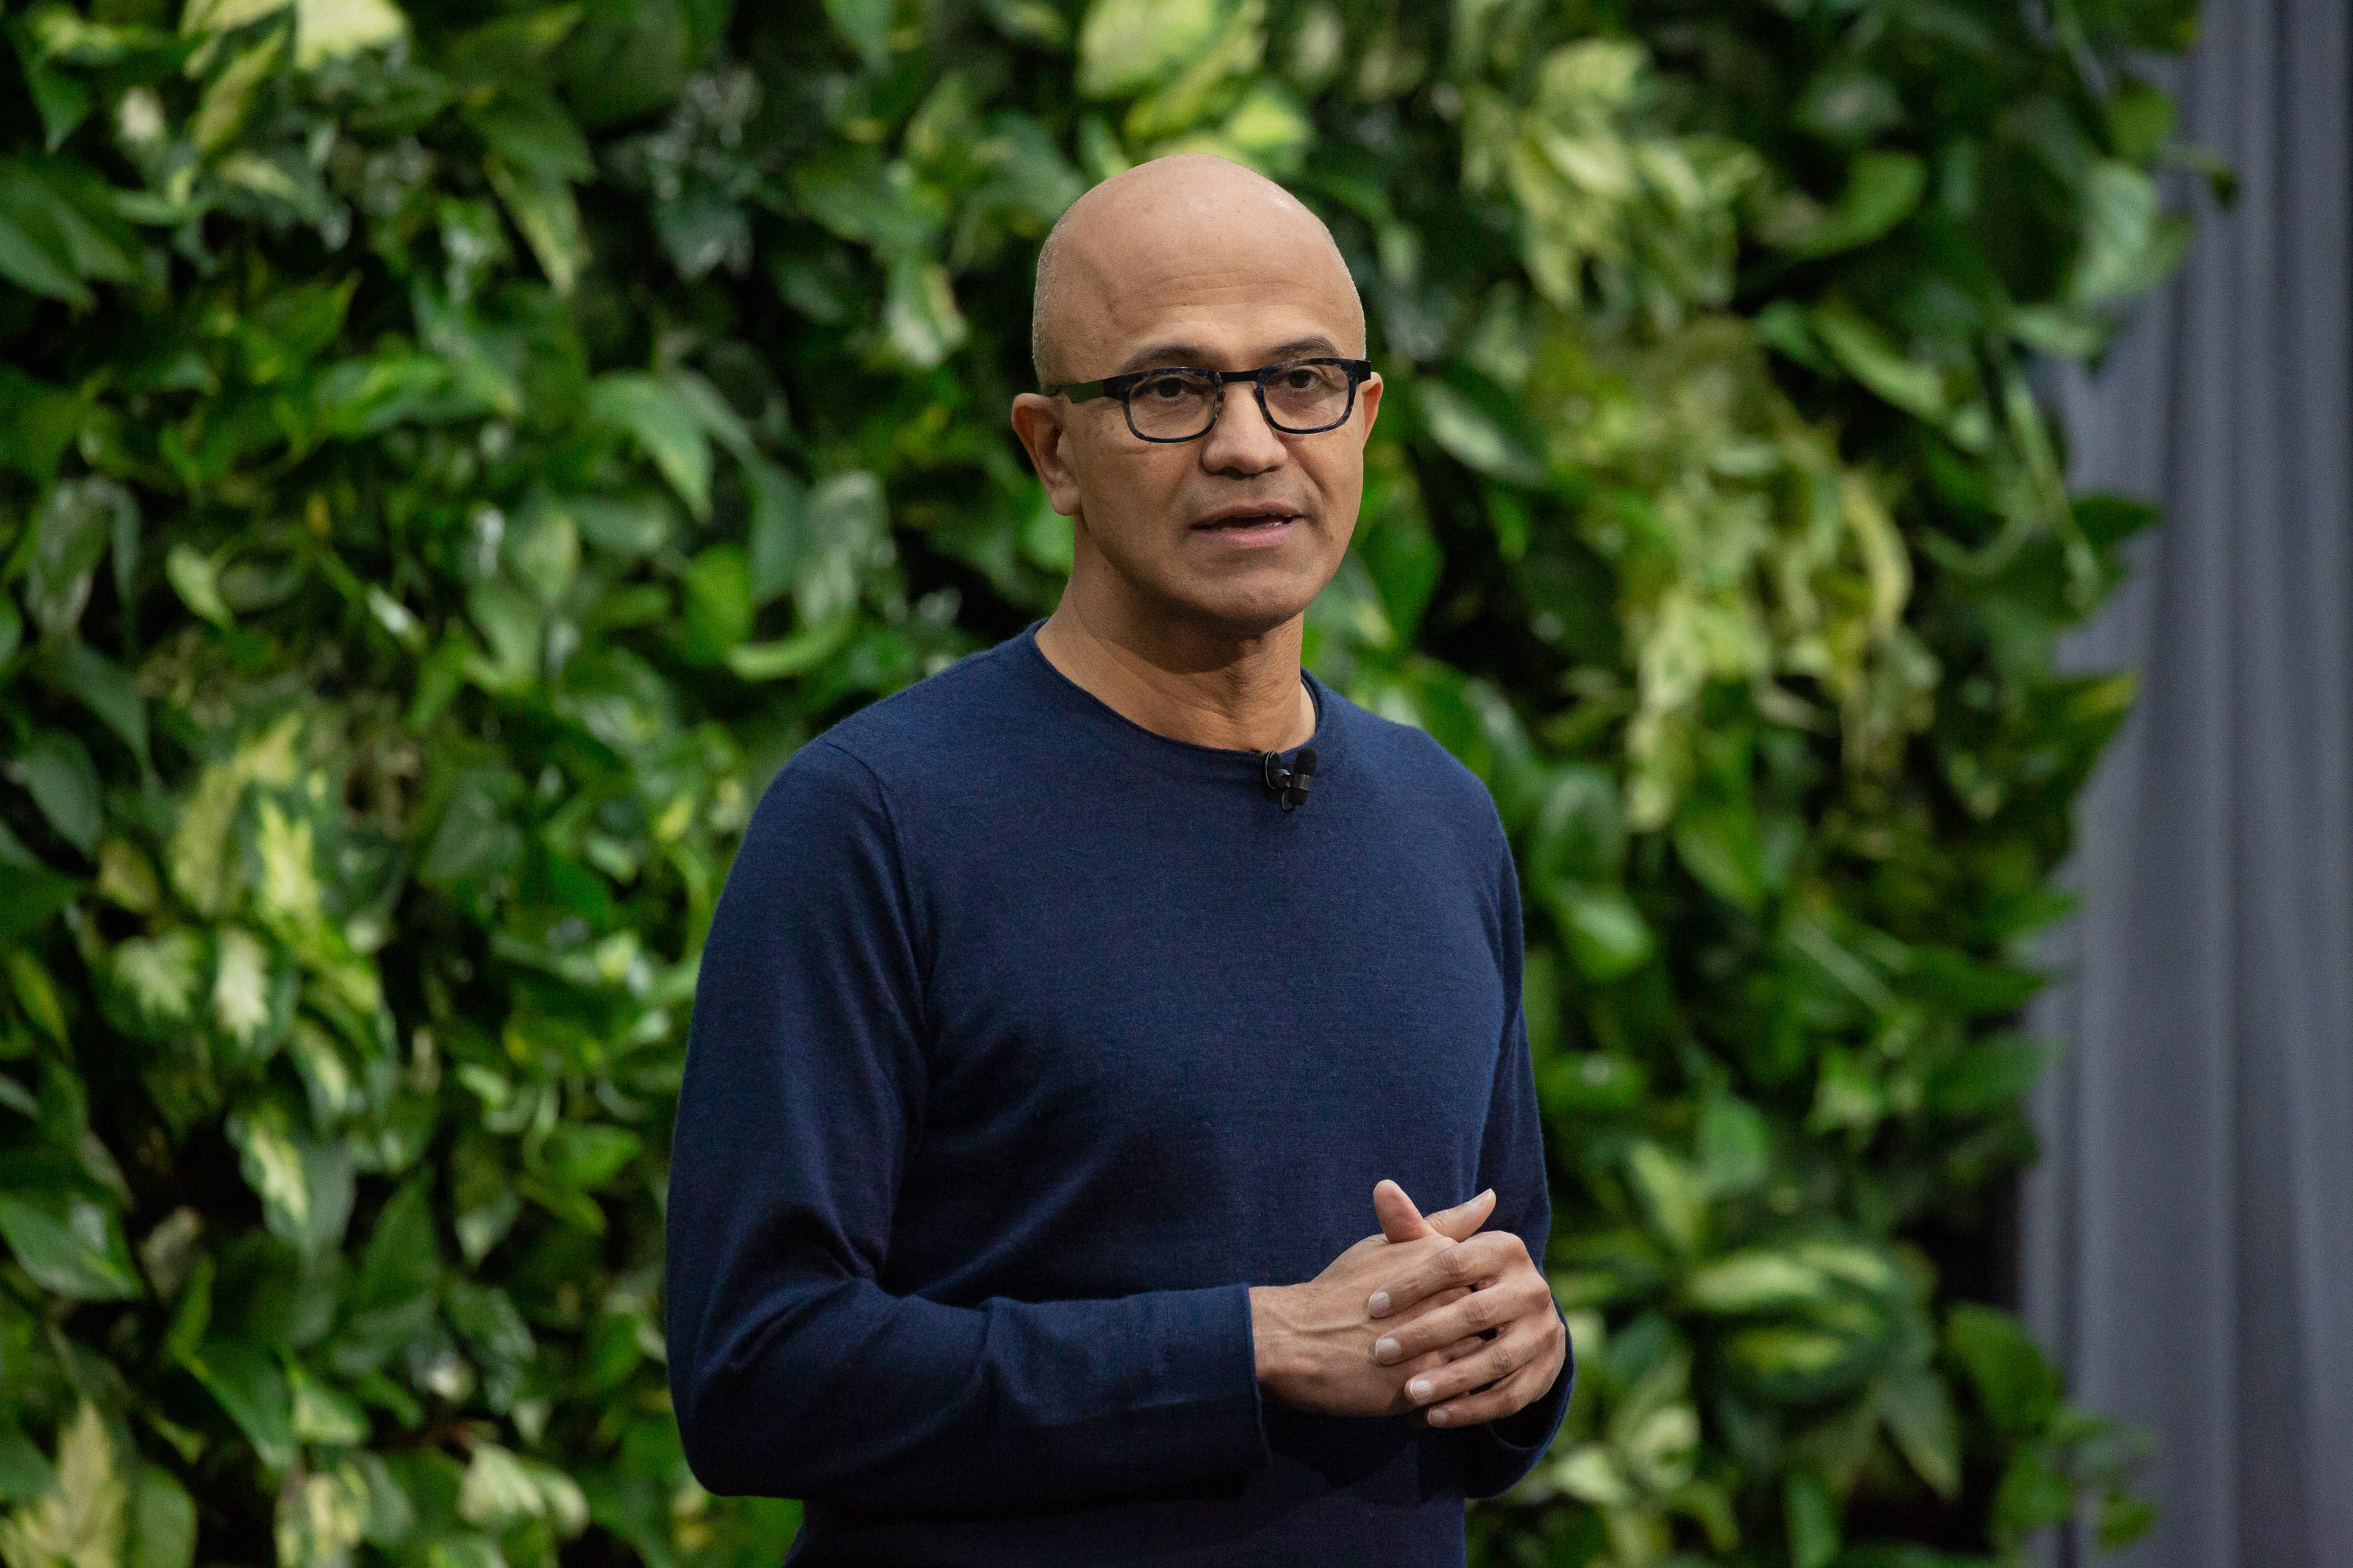 Satya Nadella at the Microsoft Corp. campus in Redmond, Washington, U.S., on January 16, 2020. | Source: Getty Images